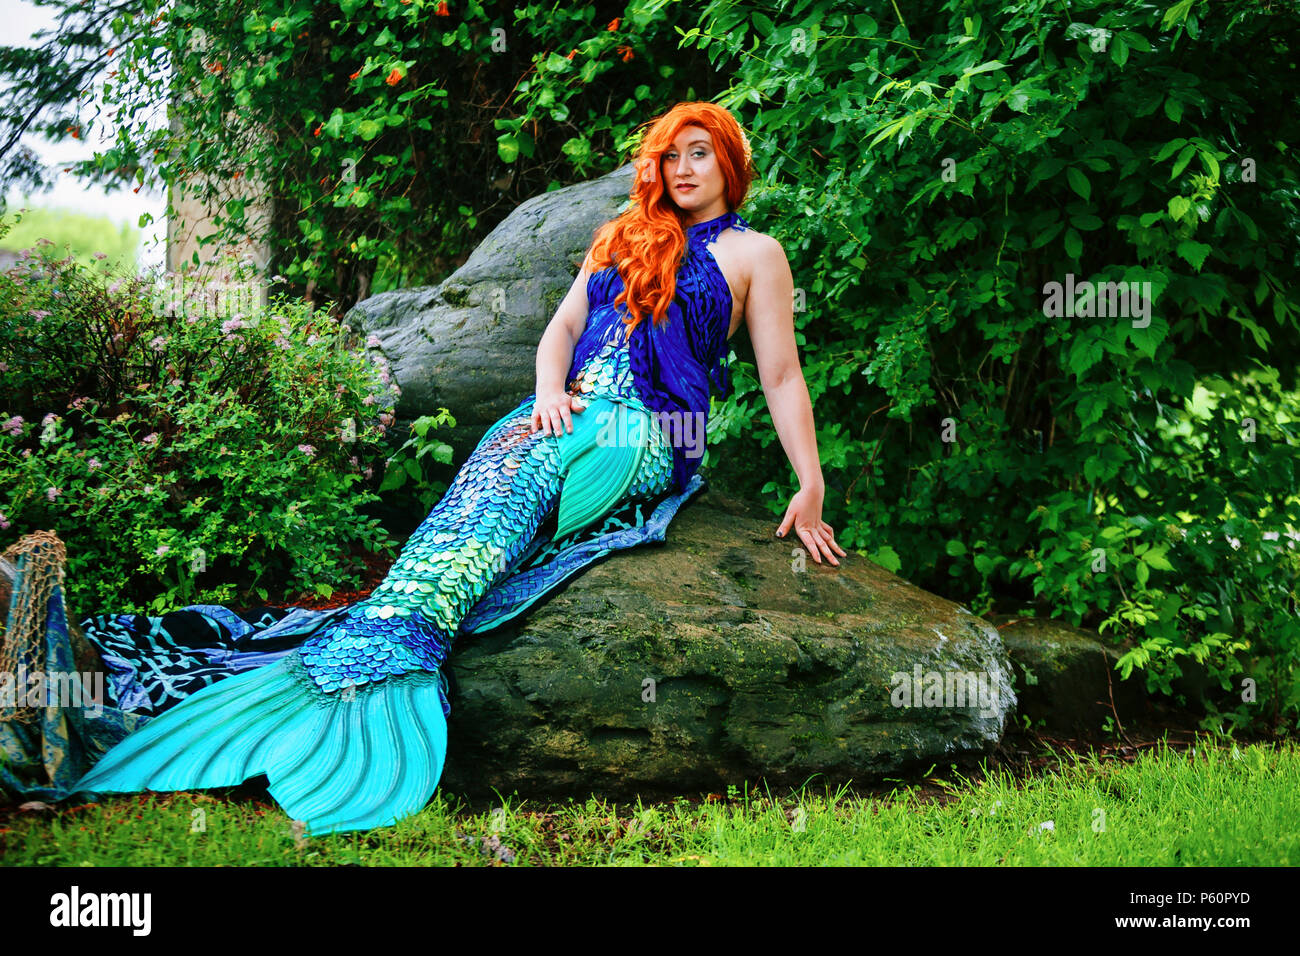 A Renaissance fair actor mermaid portrays her playful character while Stock Photo